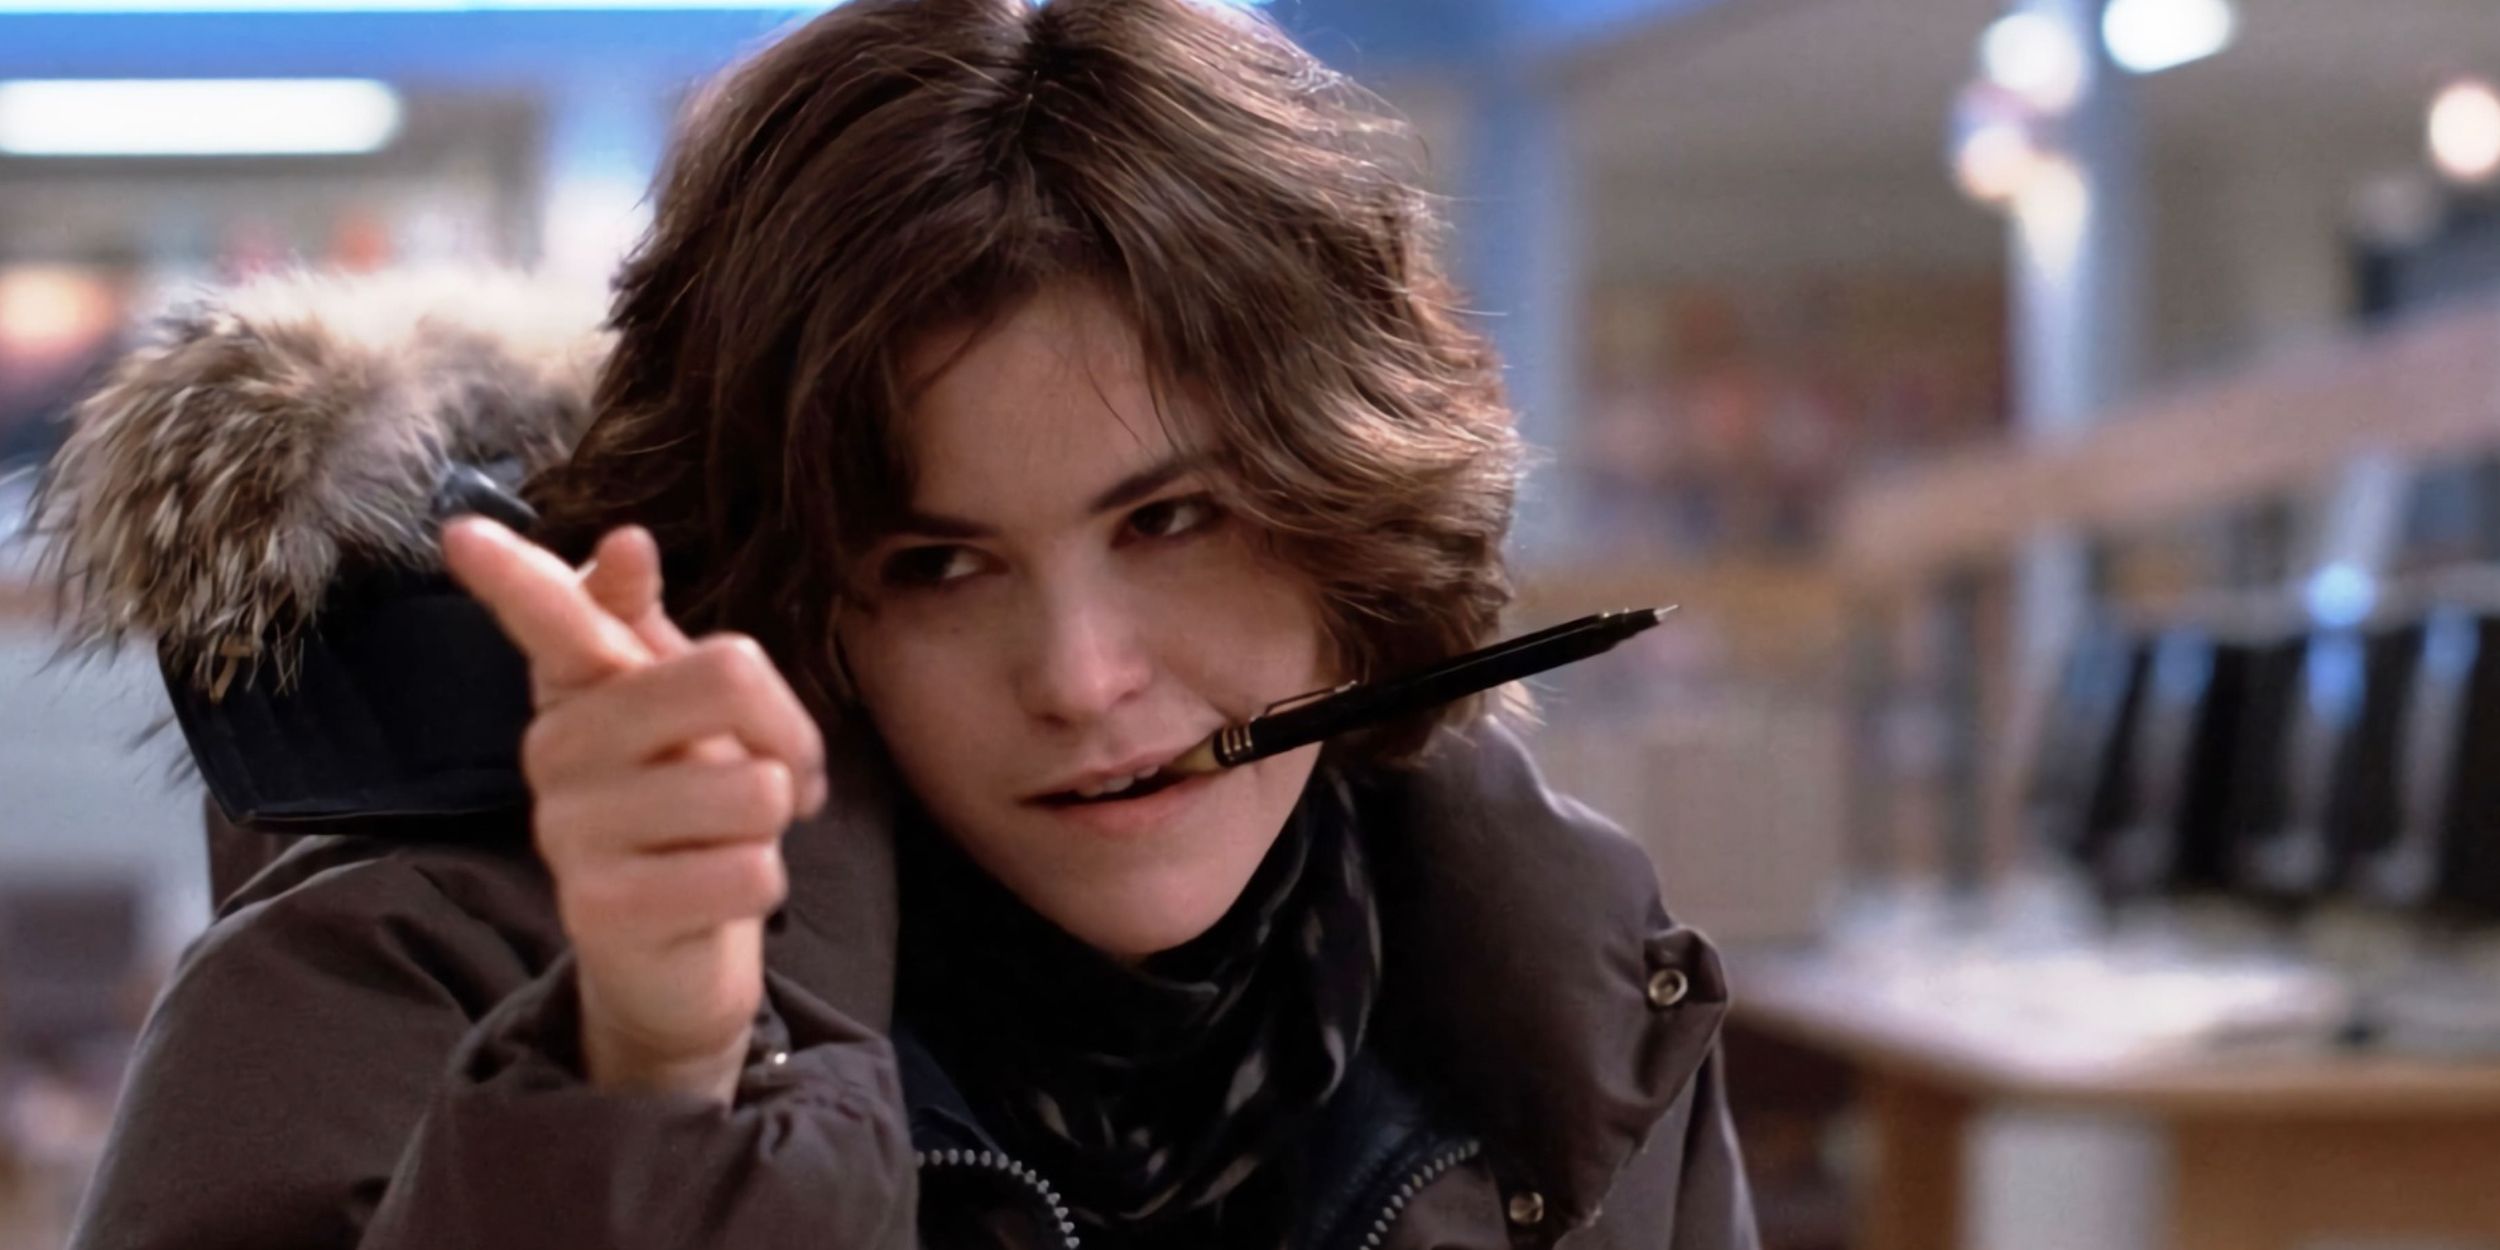 Allison points with one hand while holding a pen in her mouth in The Breakfast Club